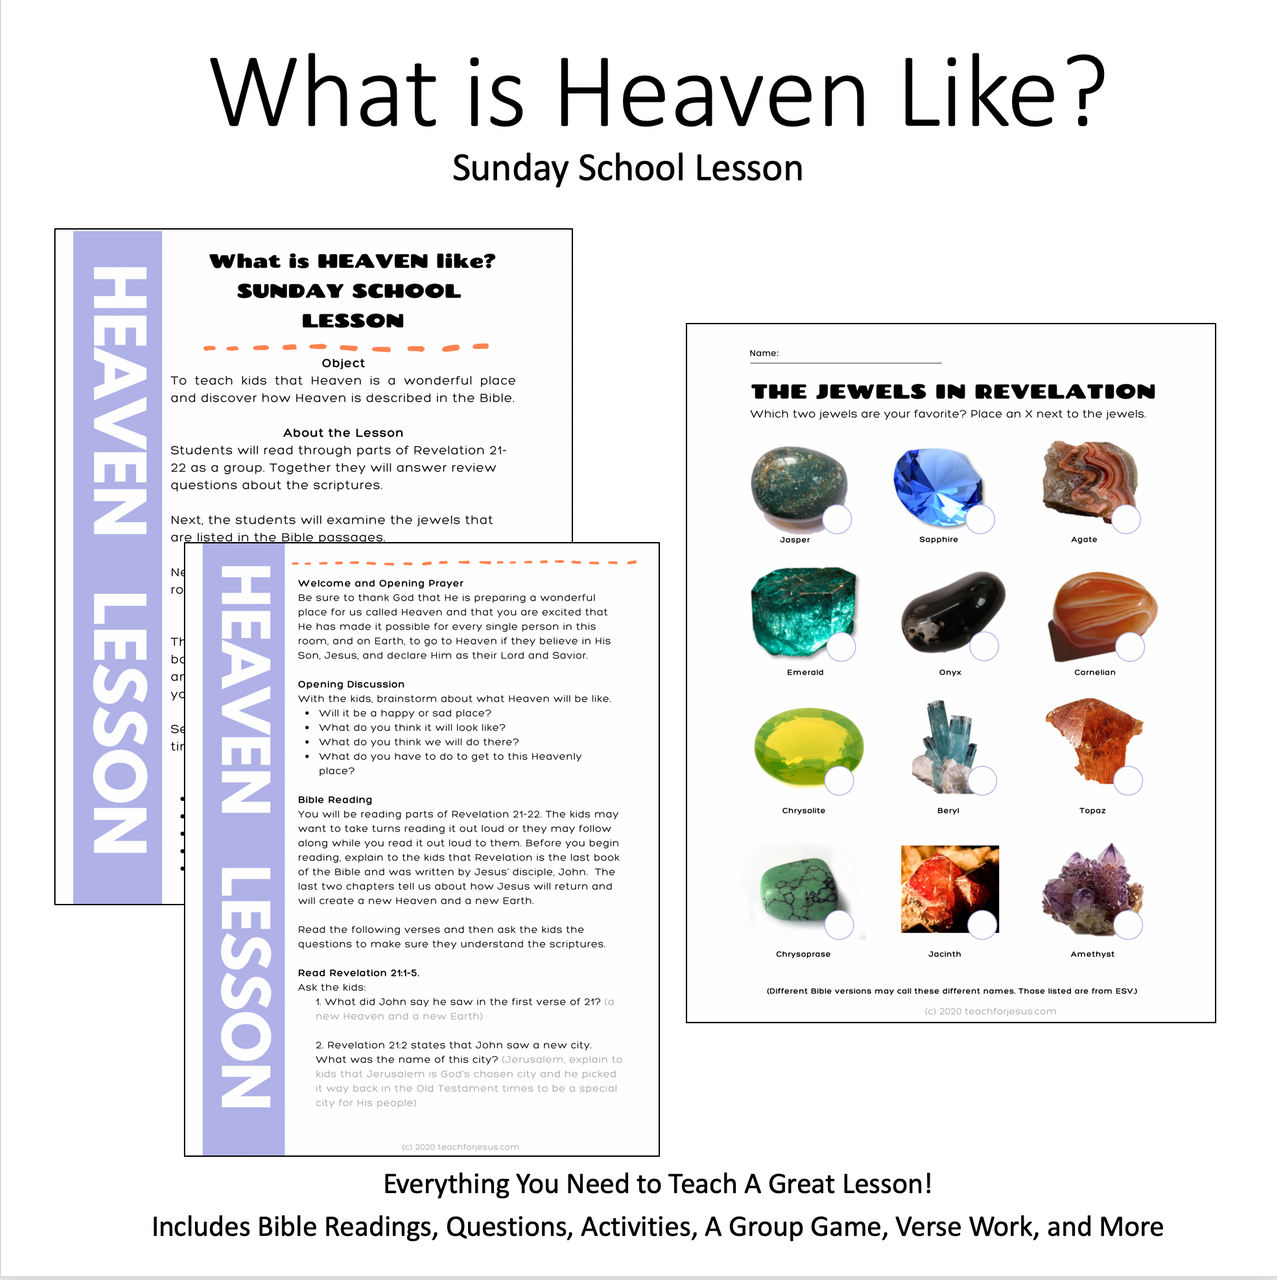 Sunday School Lesson For Kids | What is Heaven Like?